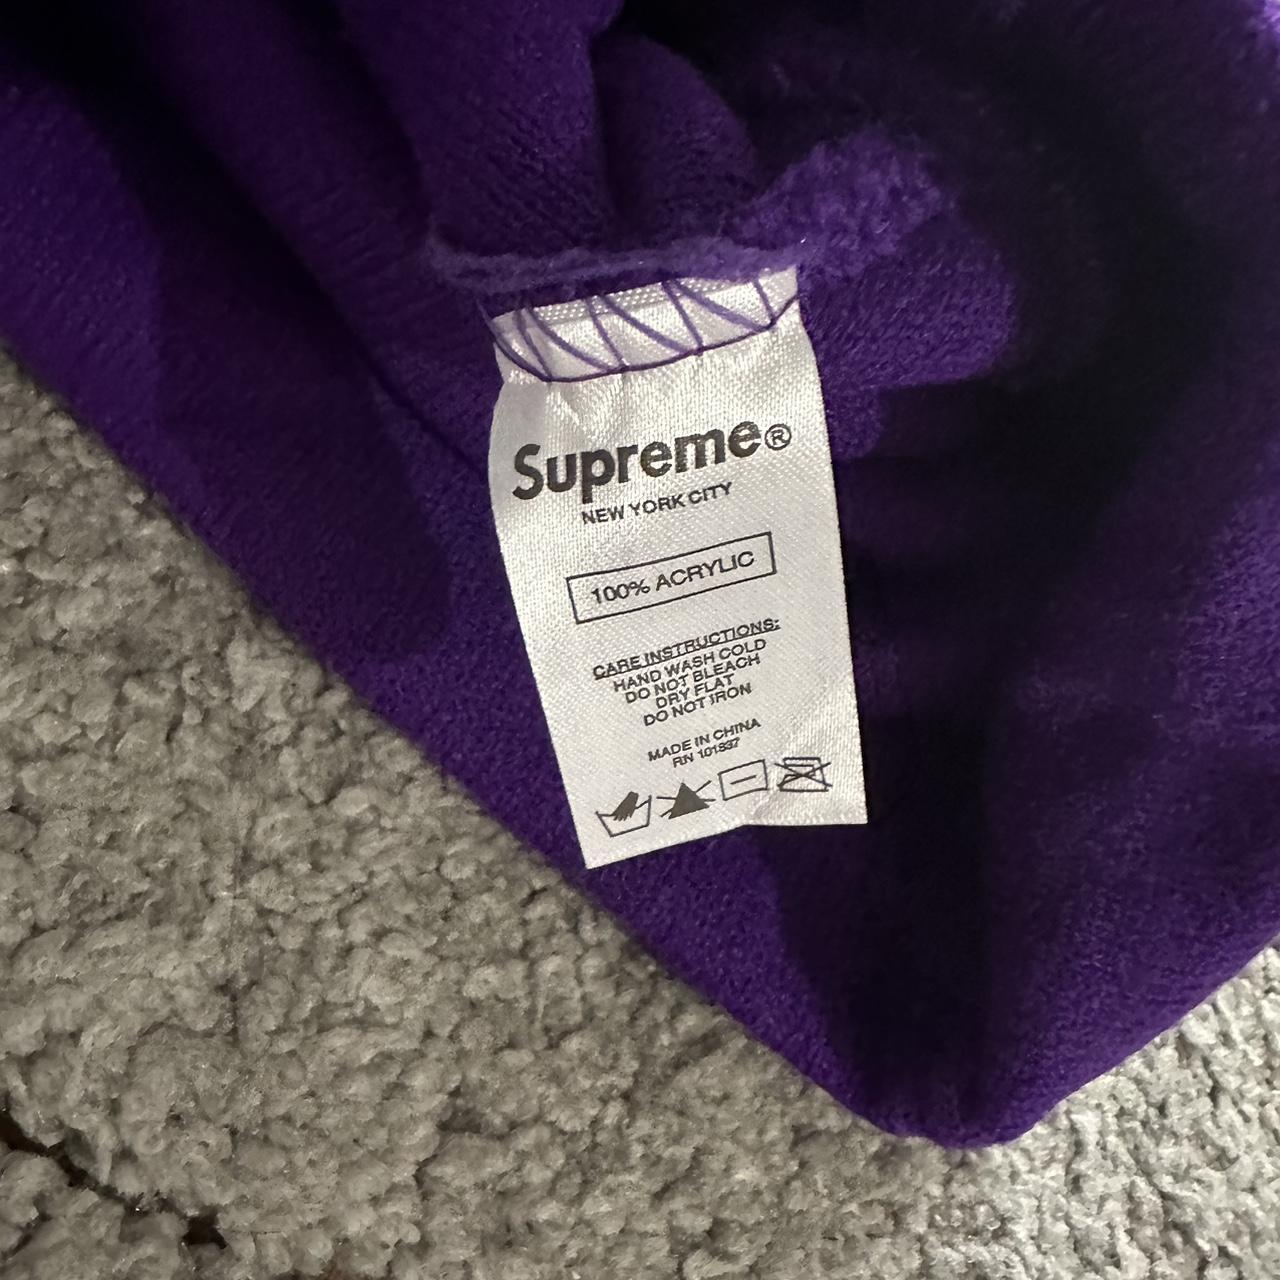 Supreme holographic logo beanie hat. Looks red on - Depop